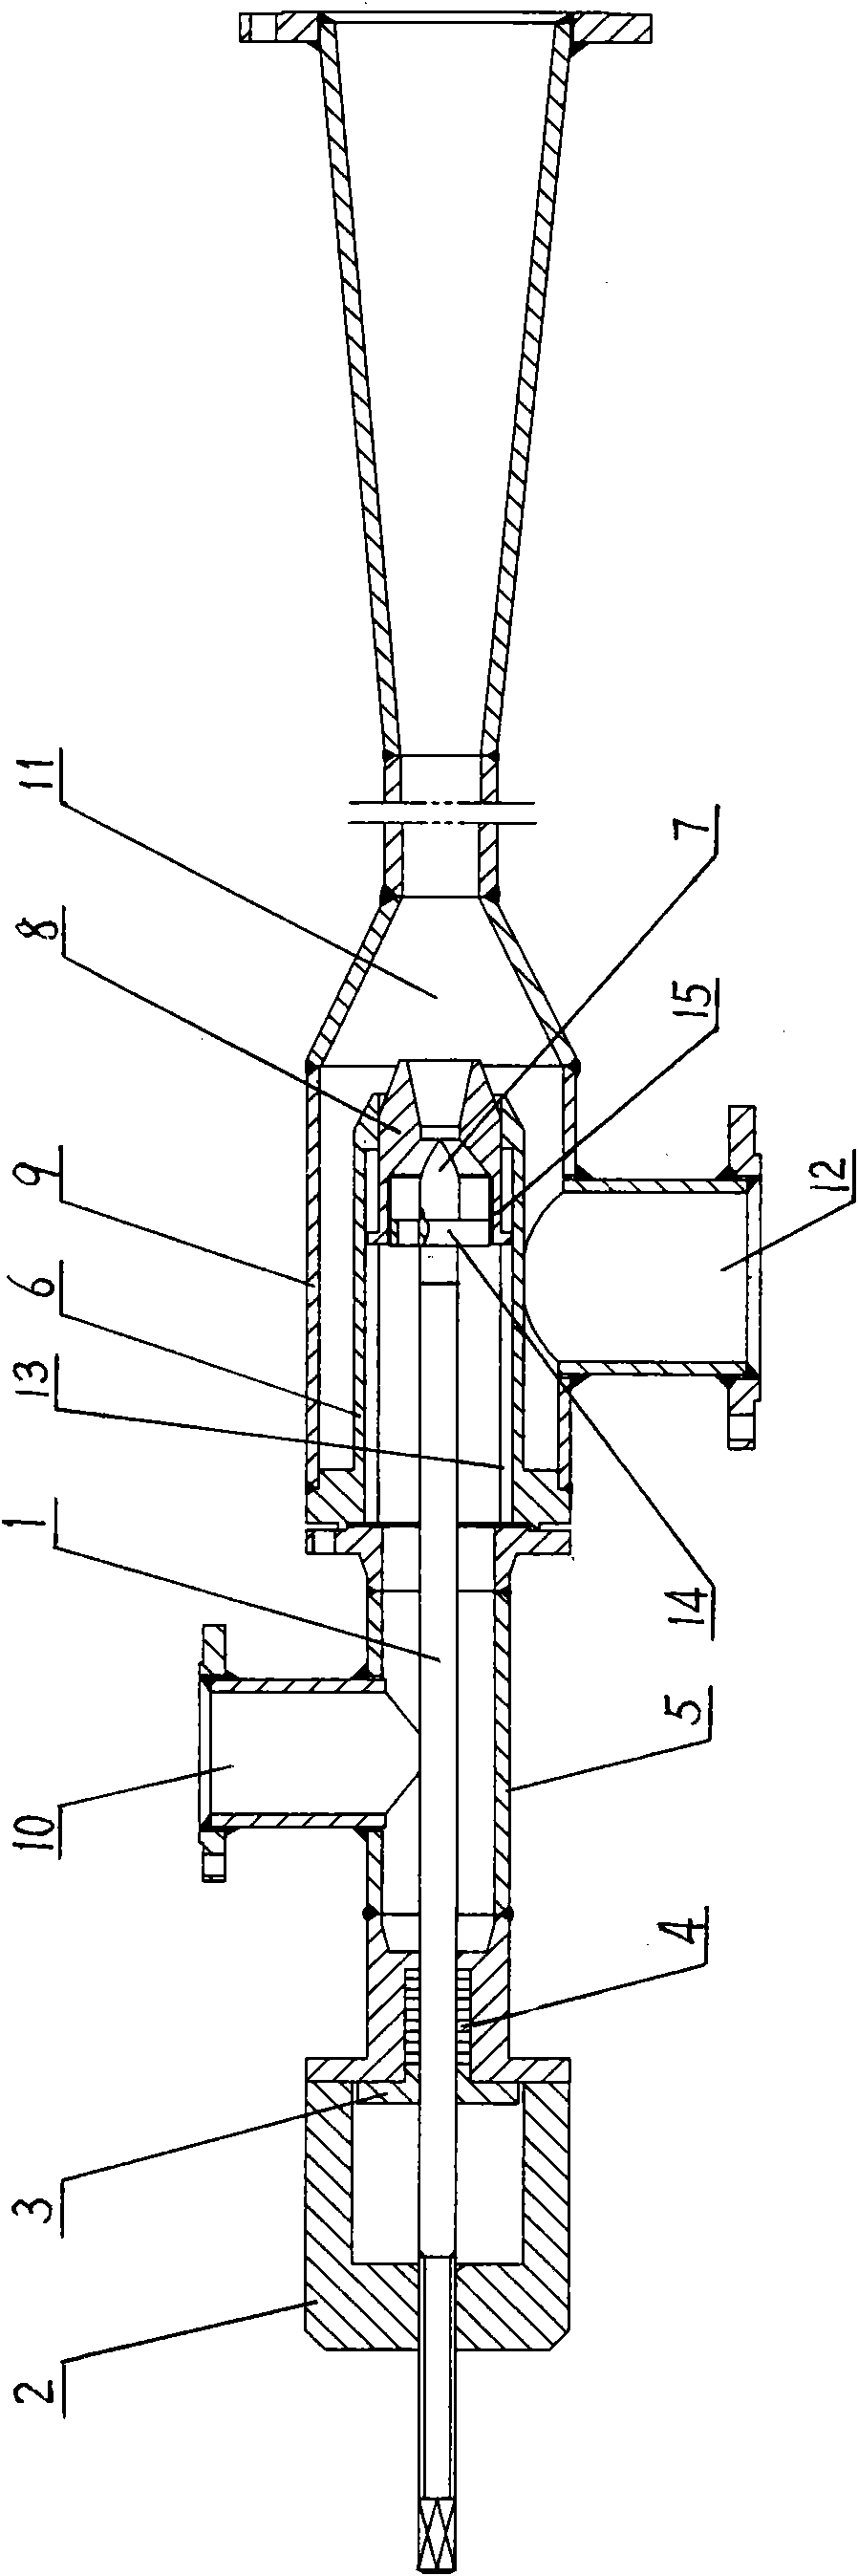 Injector with adjustable distance between nozzle and mixing chamber inlet and adjustable nozzle critical sectional area